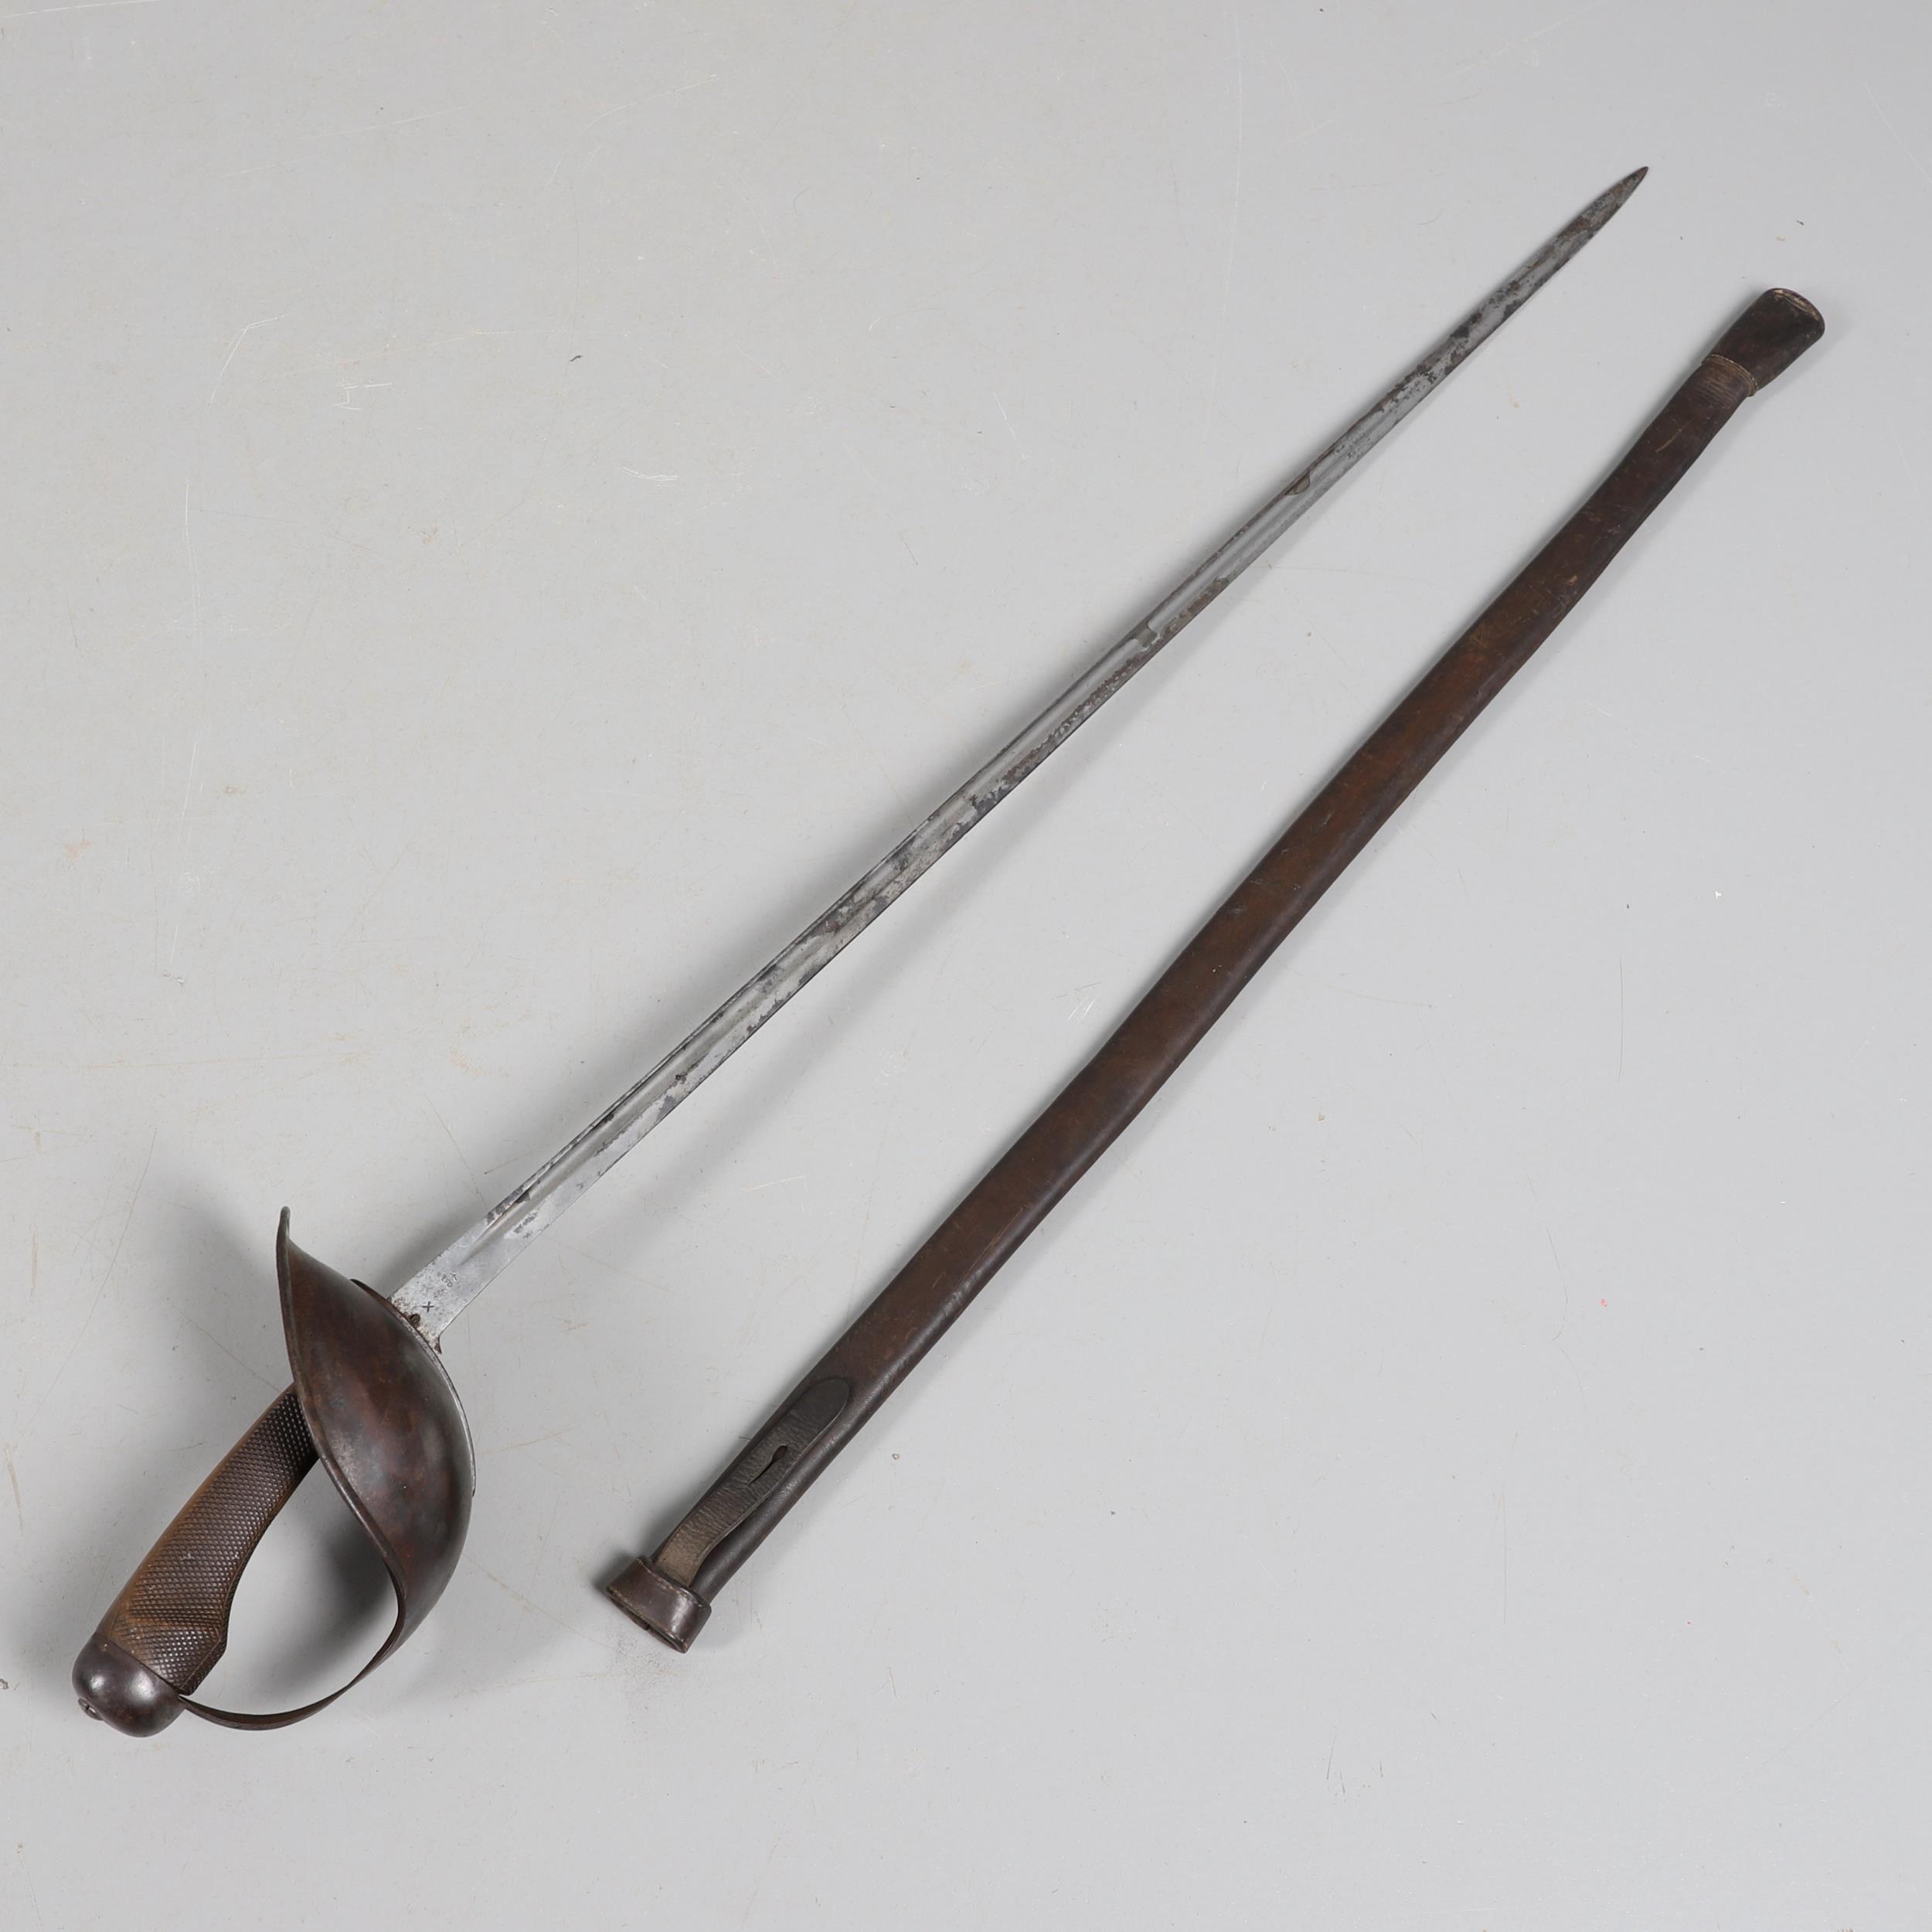 A 1908 PATTERN CAVALRY SWORD AND SCABBARD. - Image 5 of 15